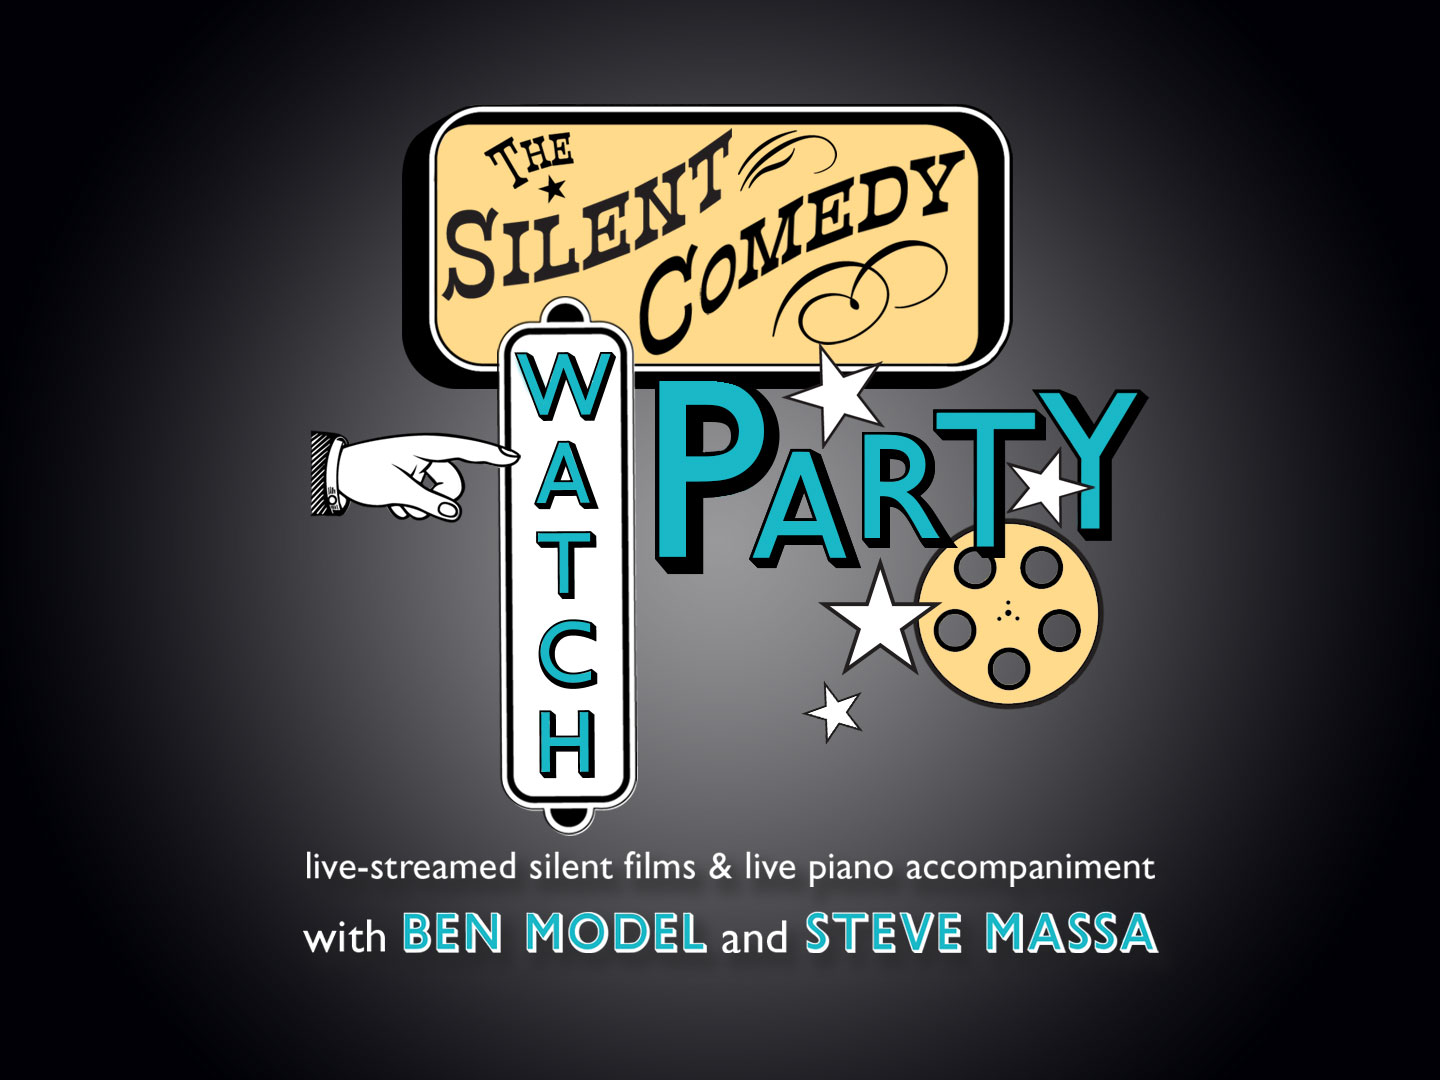 The Silent Comedy Watch Party – Ben Model